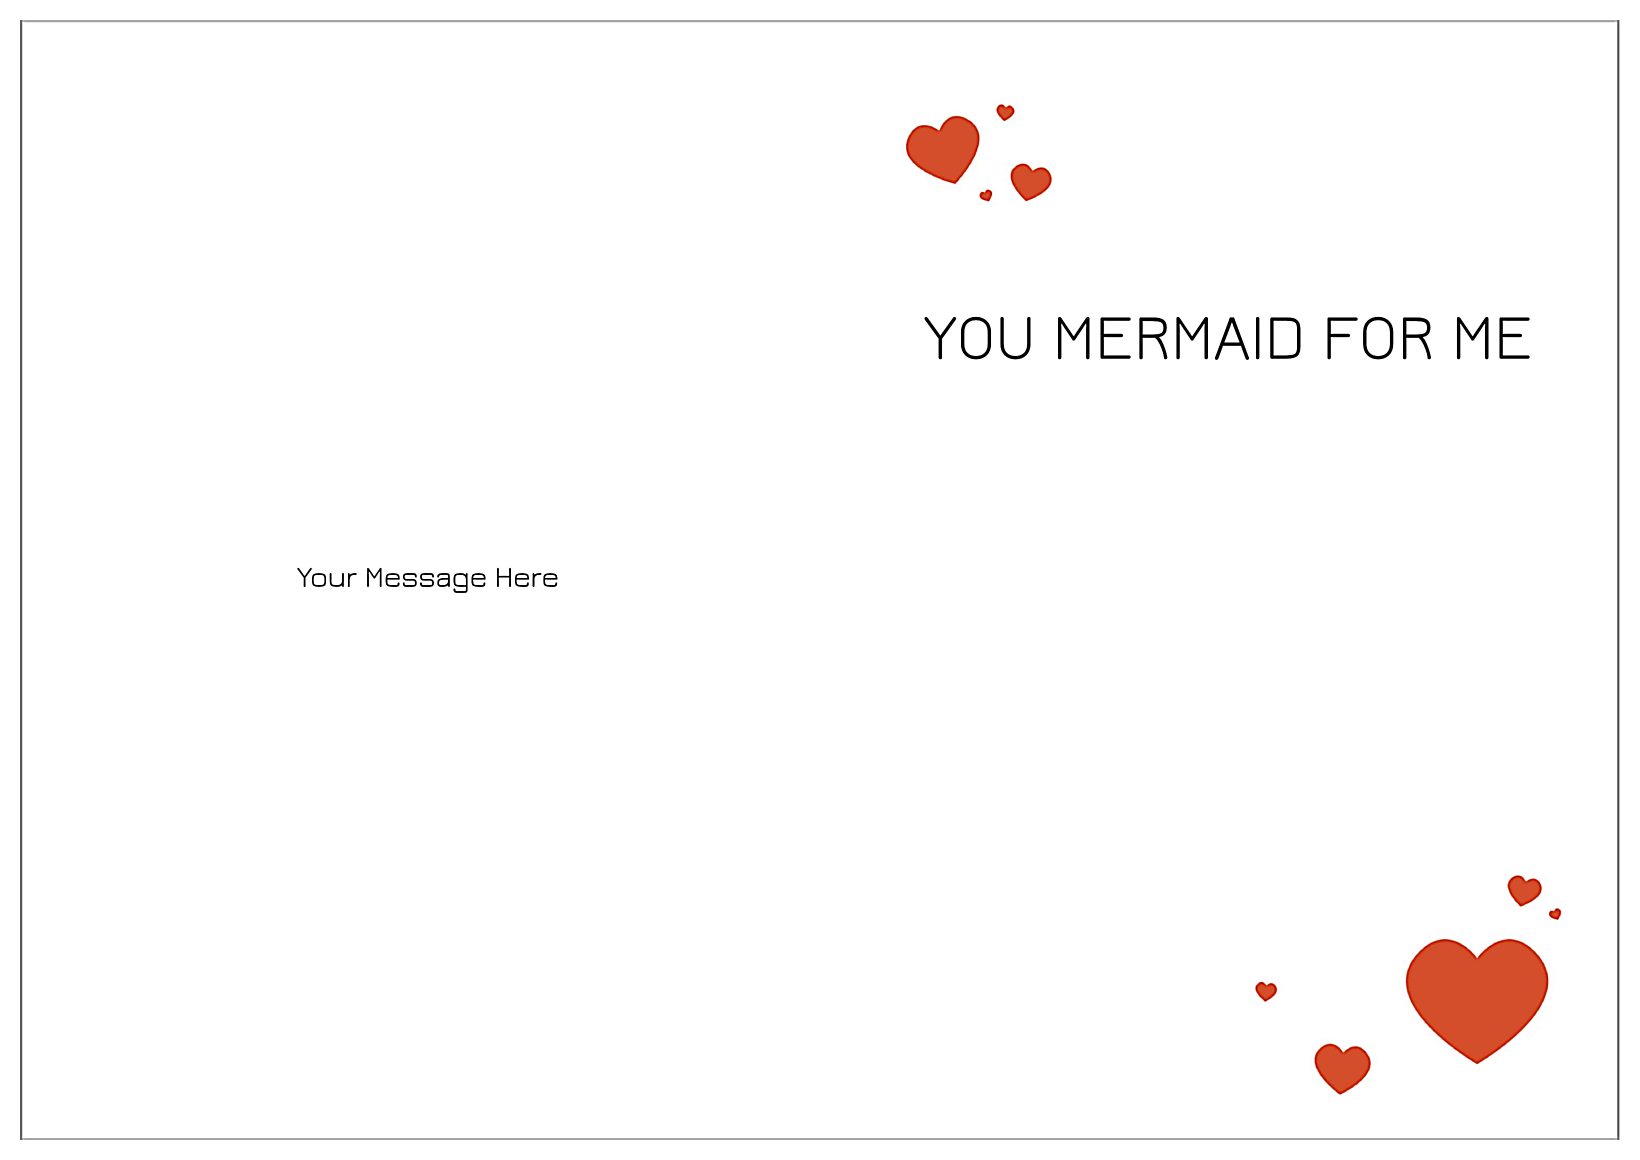 You Mermaid for Me back - Greeting Cards Maker